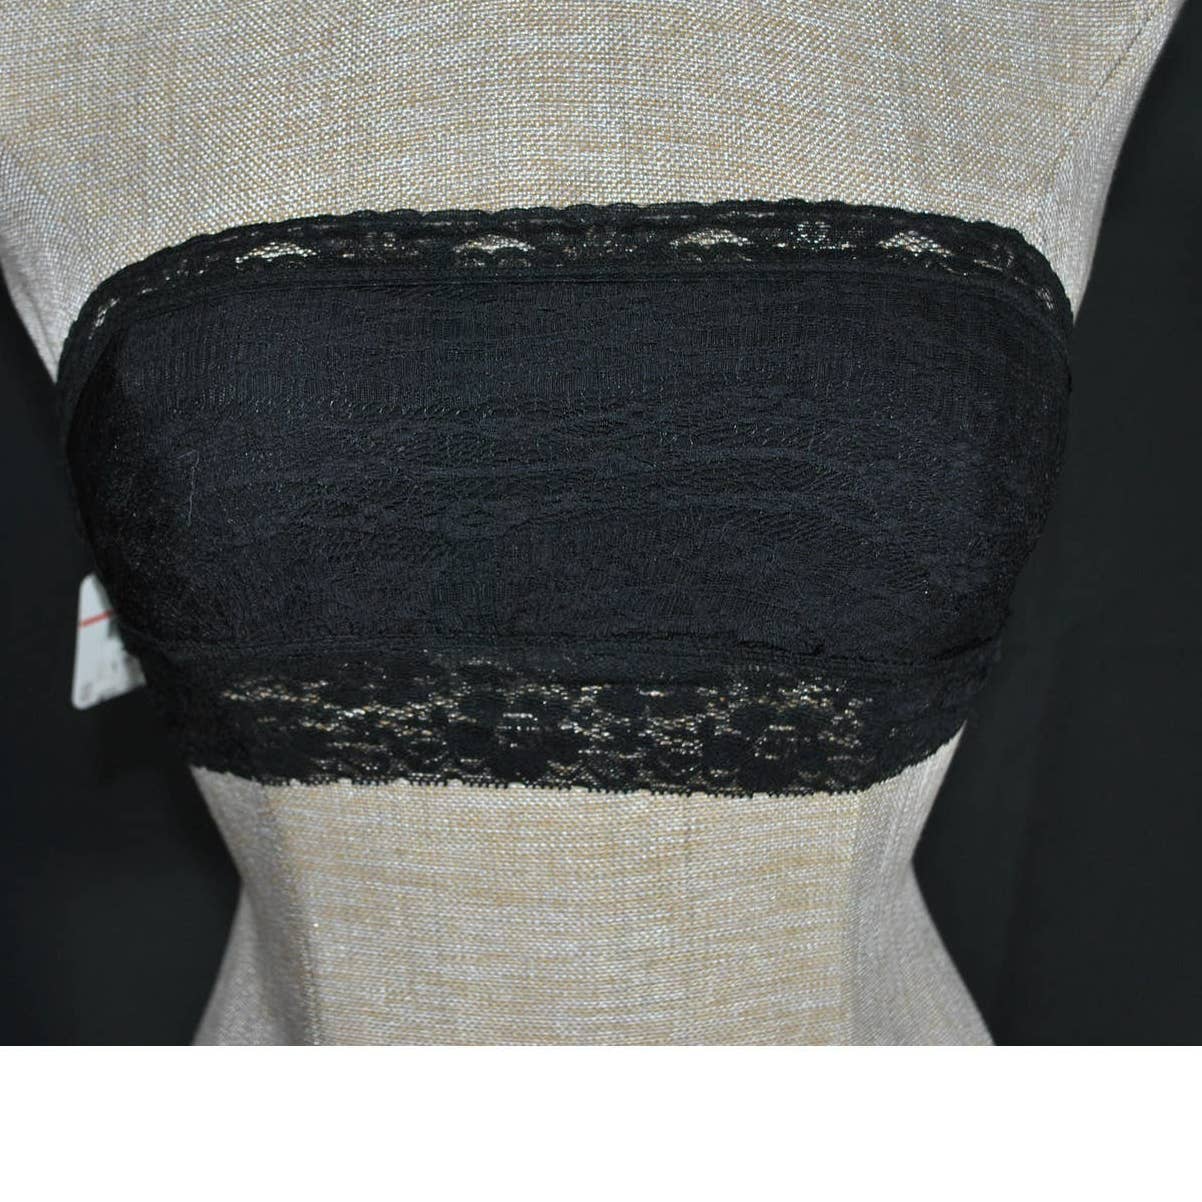 NWT Free People Intimately Black Lace Bandeau Top - XS